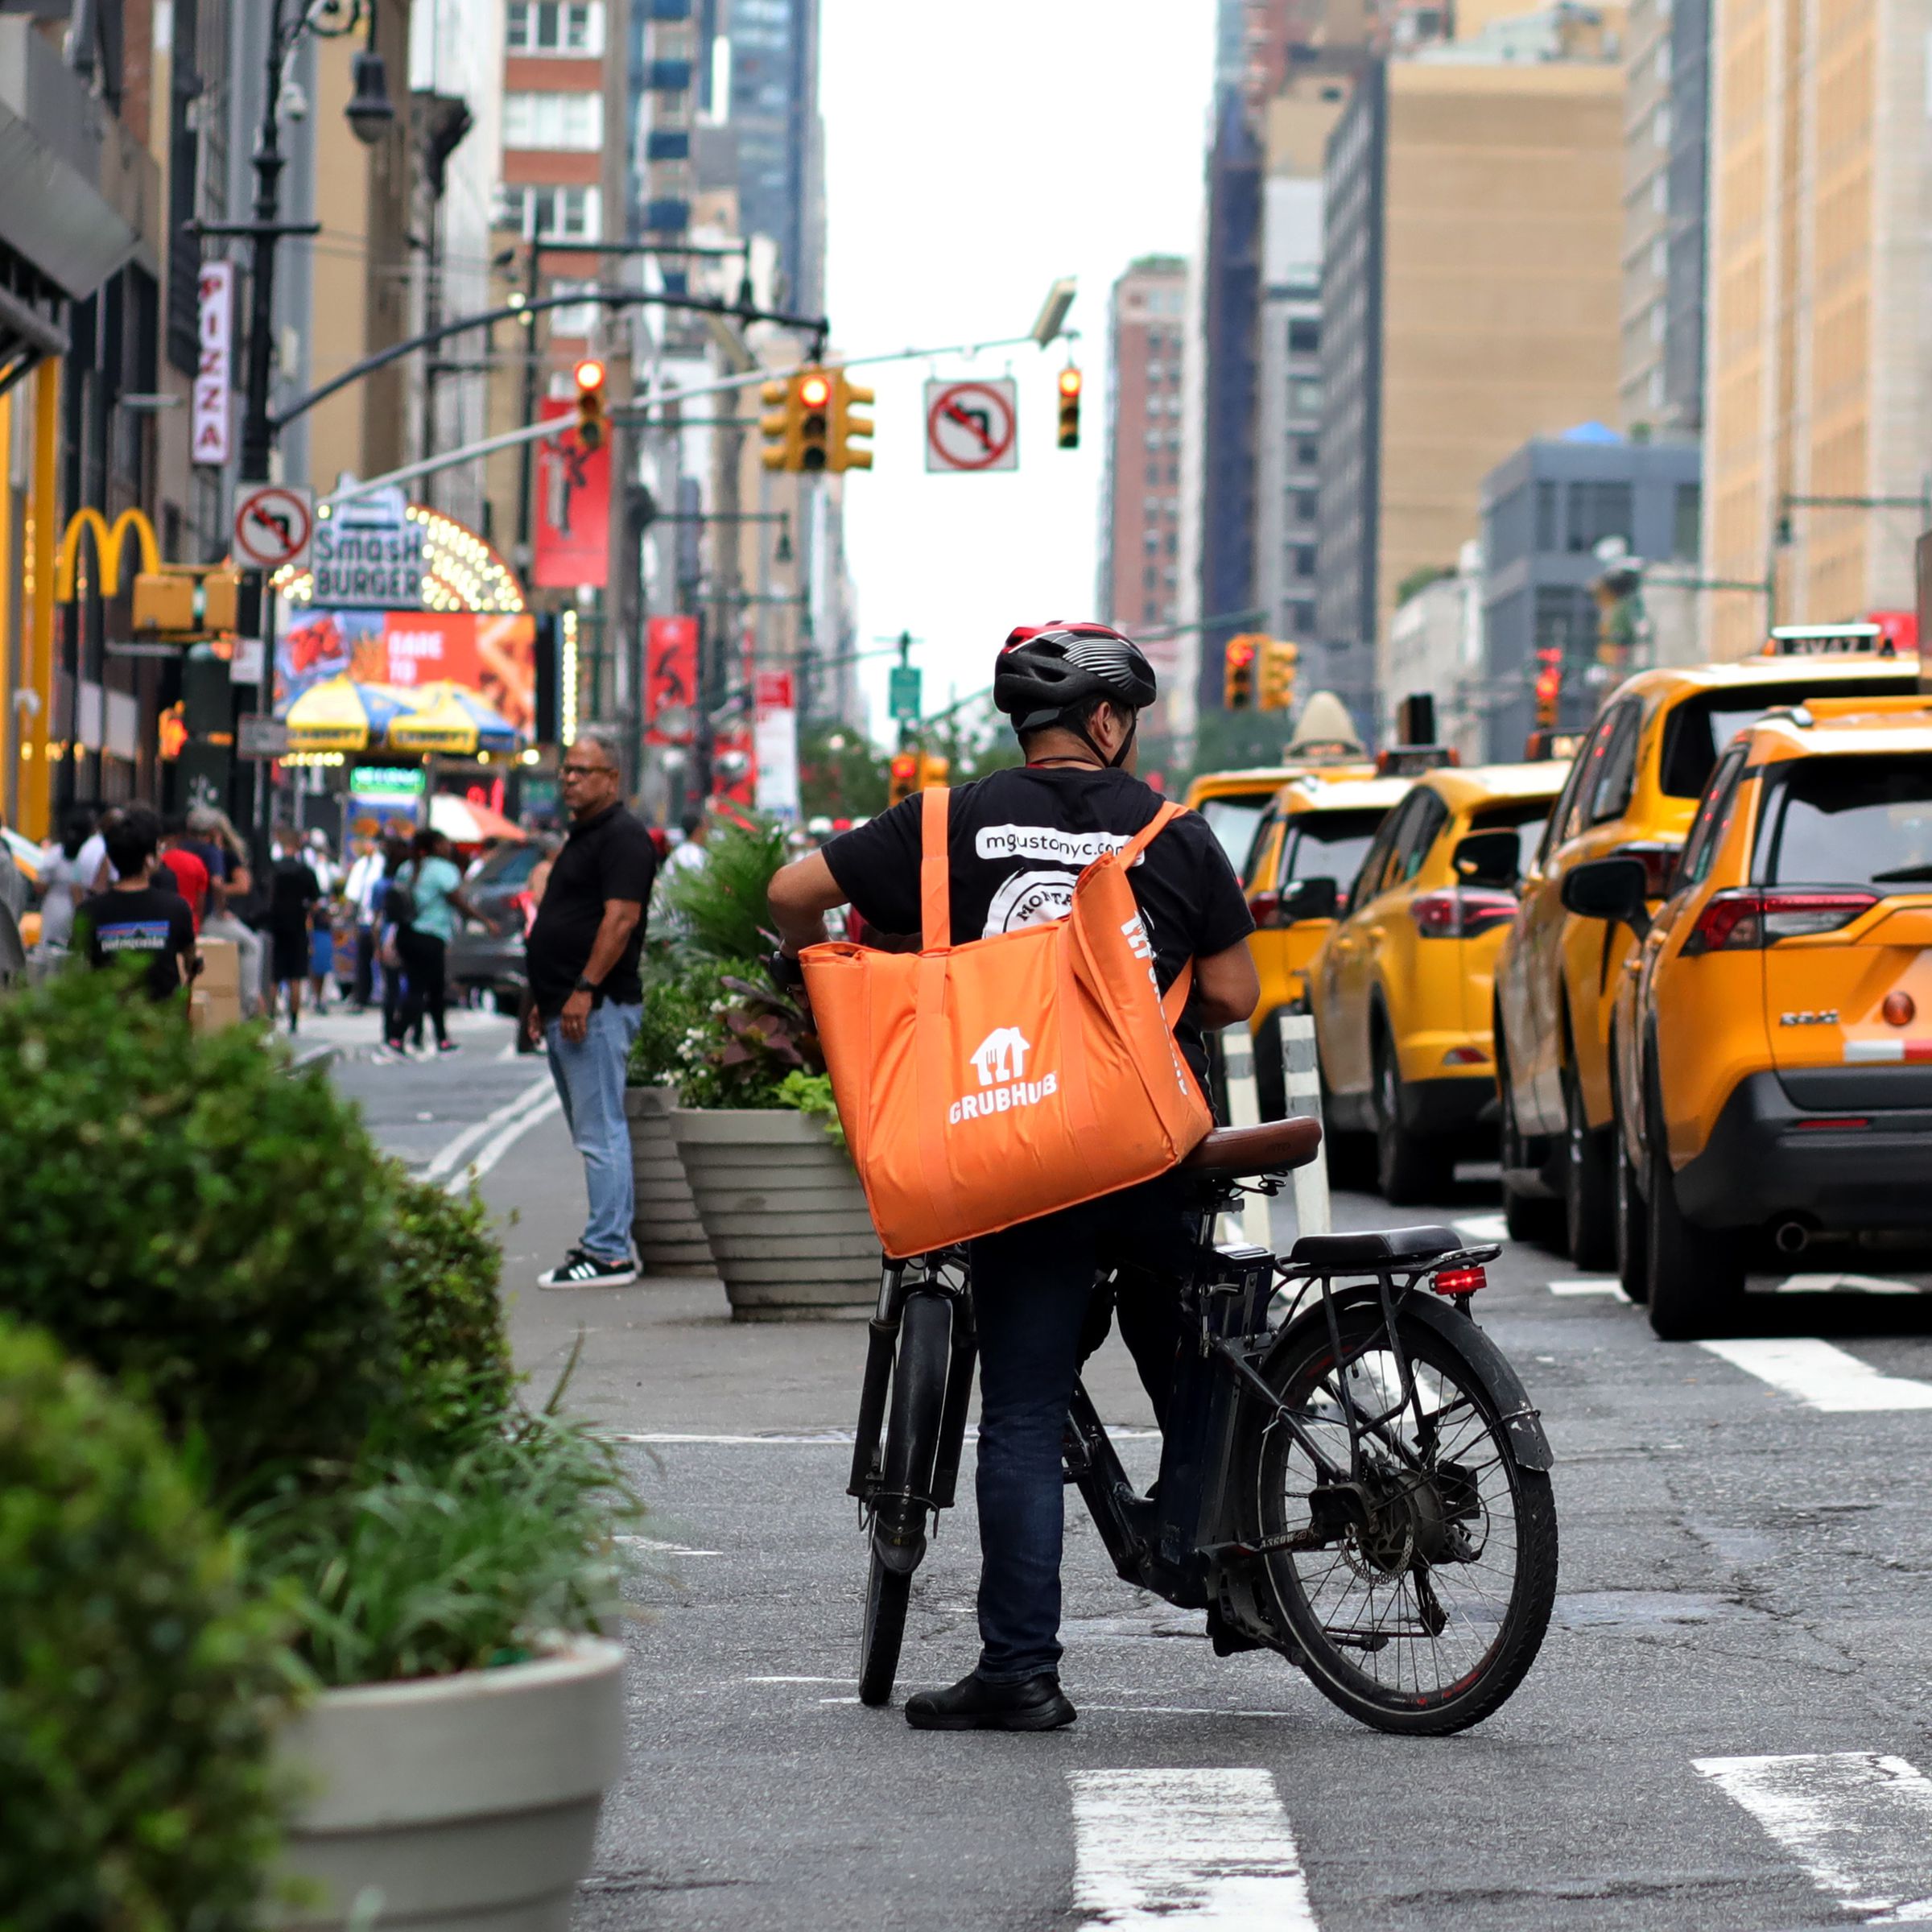 Delivery worker in NYC